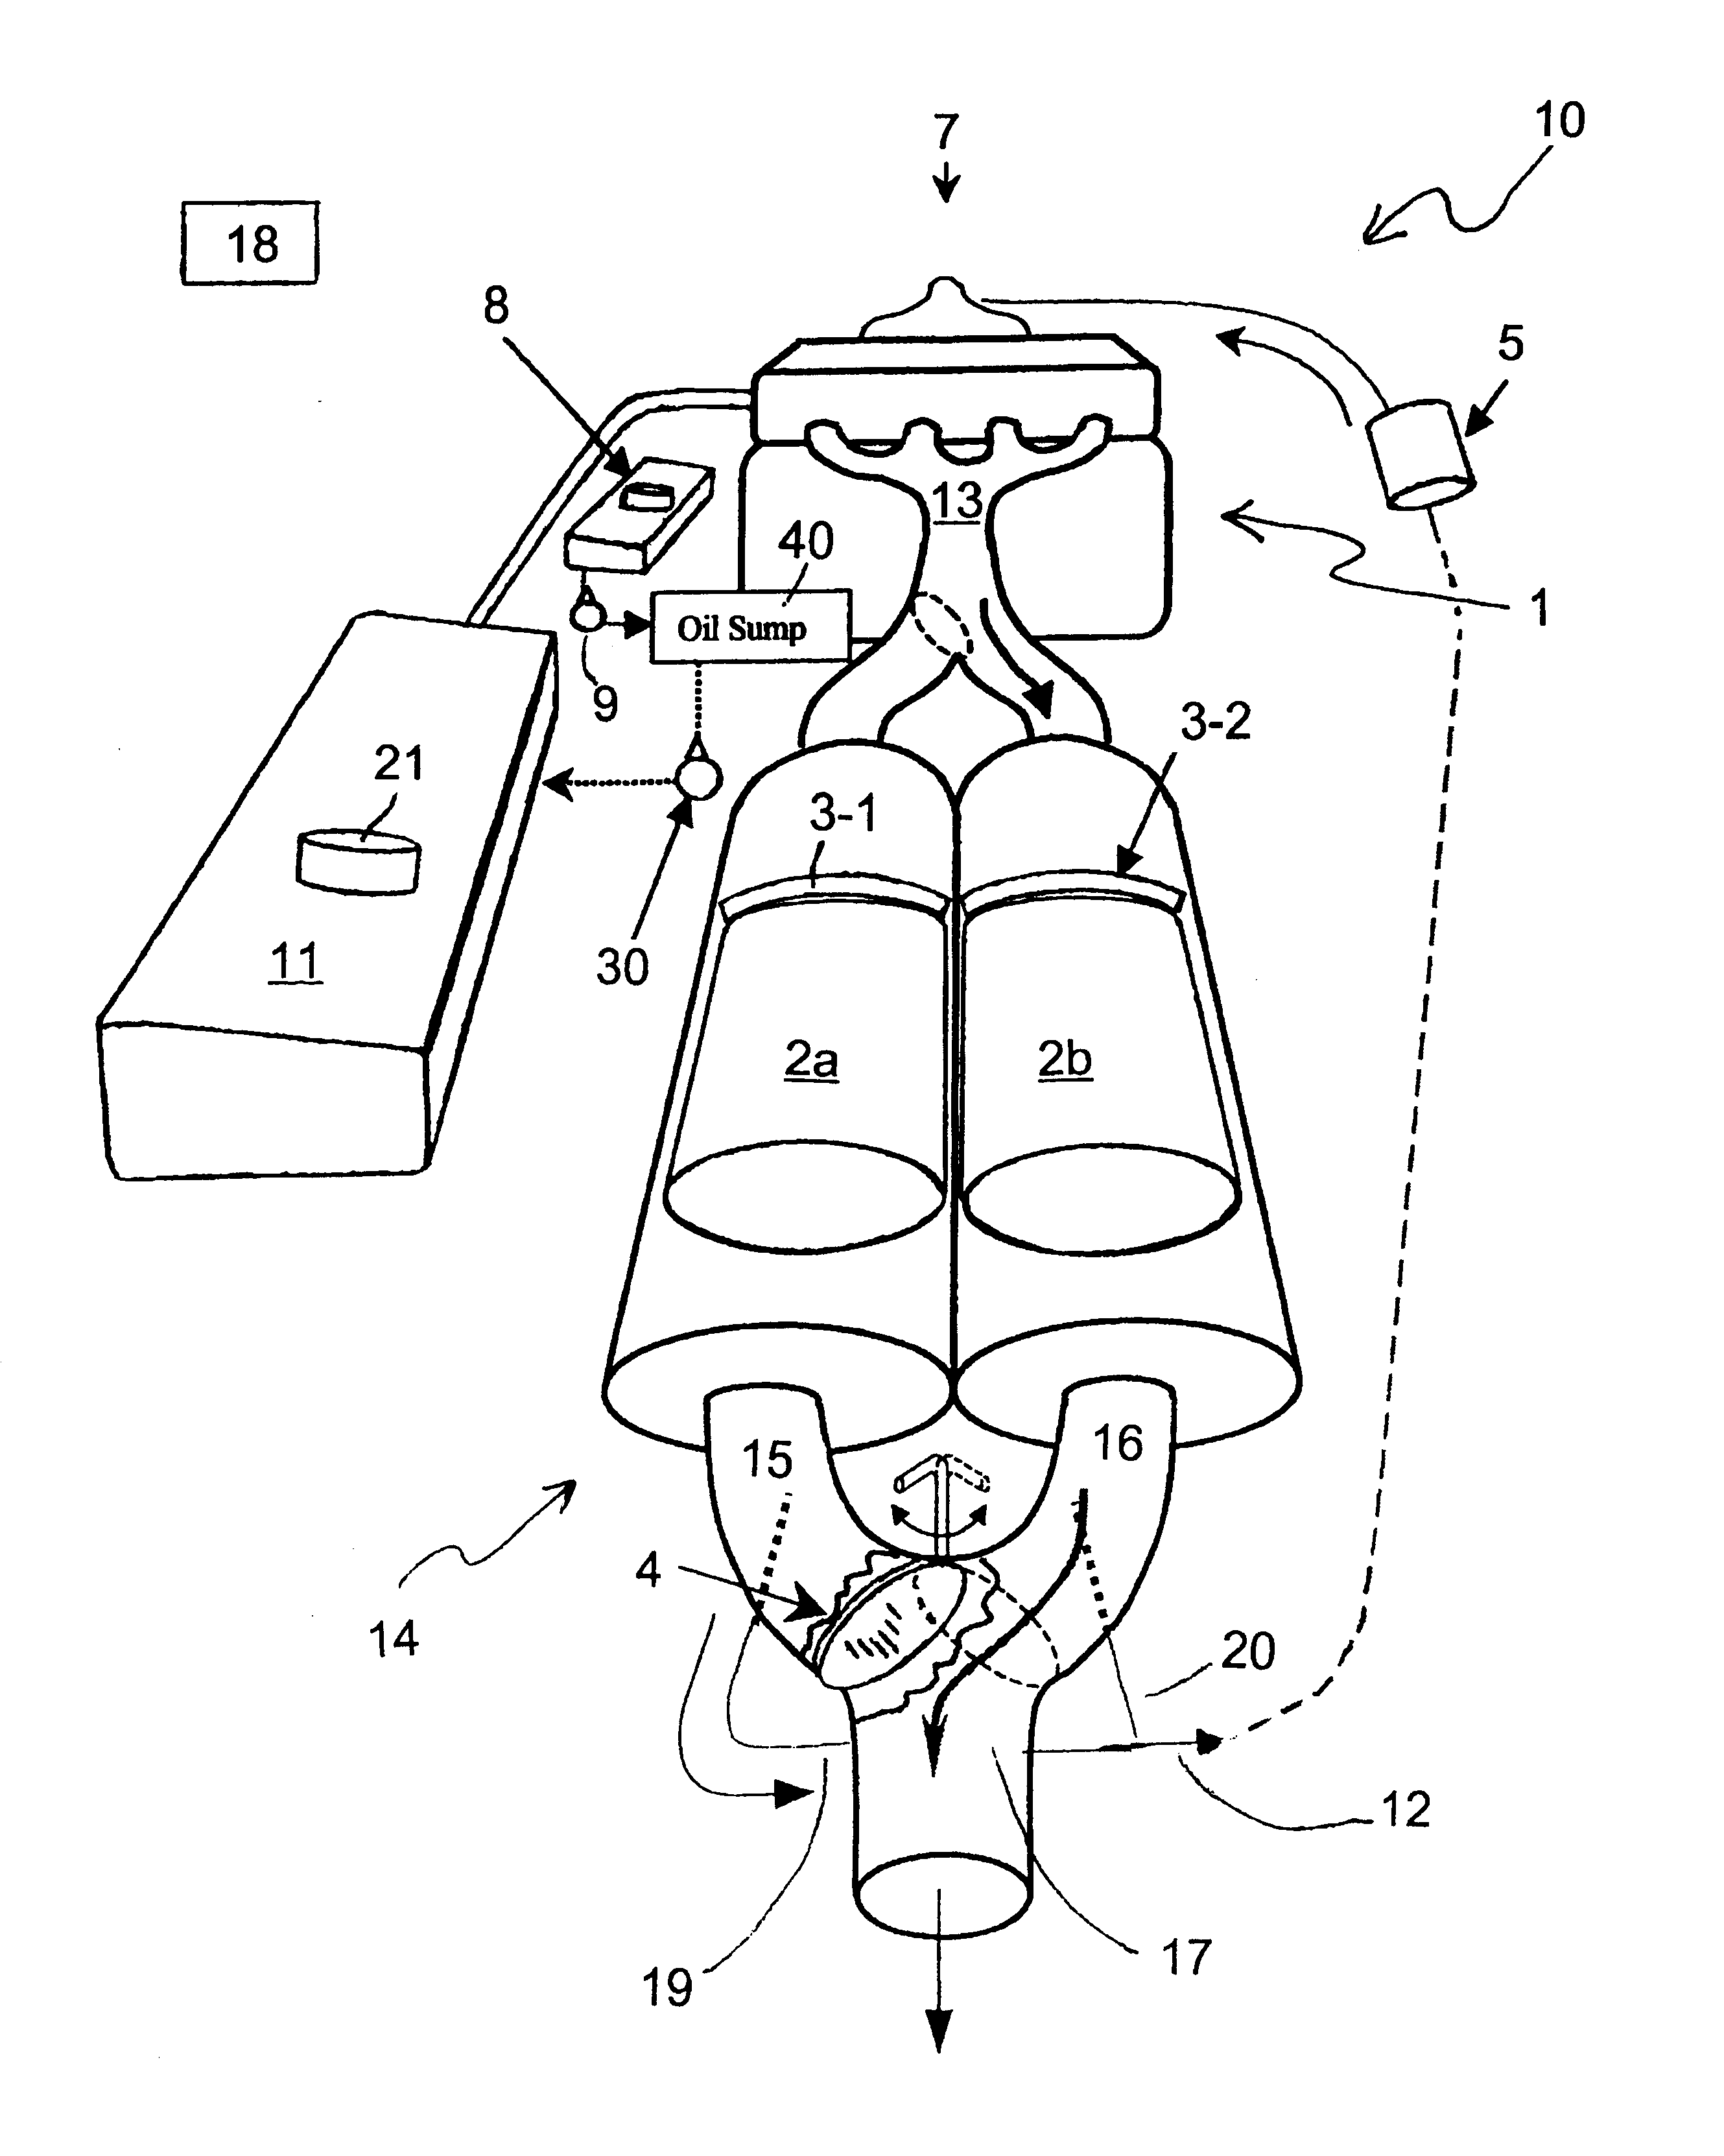 System for and methods of operating diesel engines to reduce harmful exhaust emissions and to improve engine lubrication